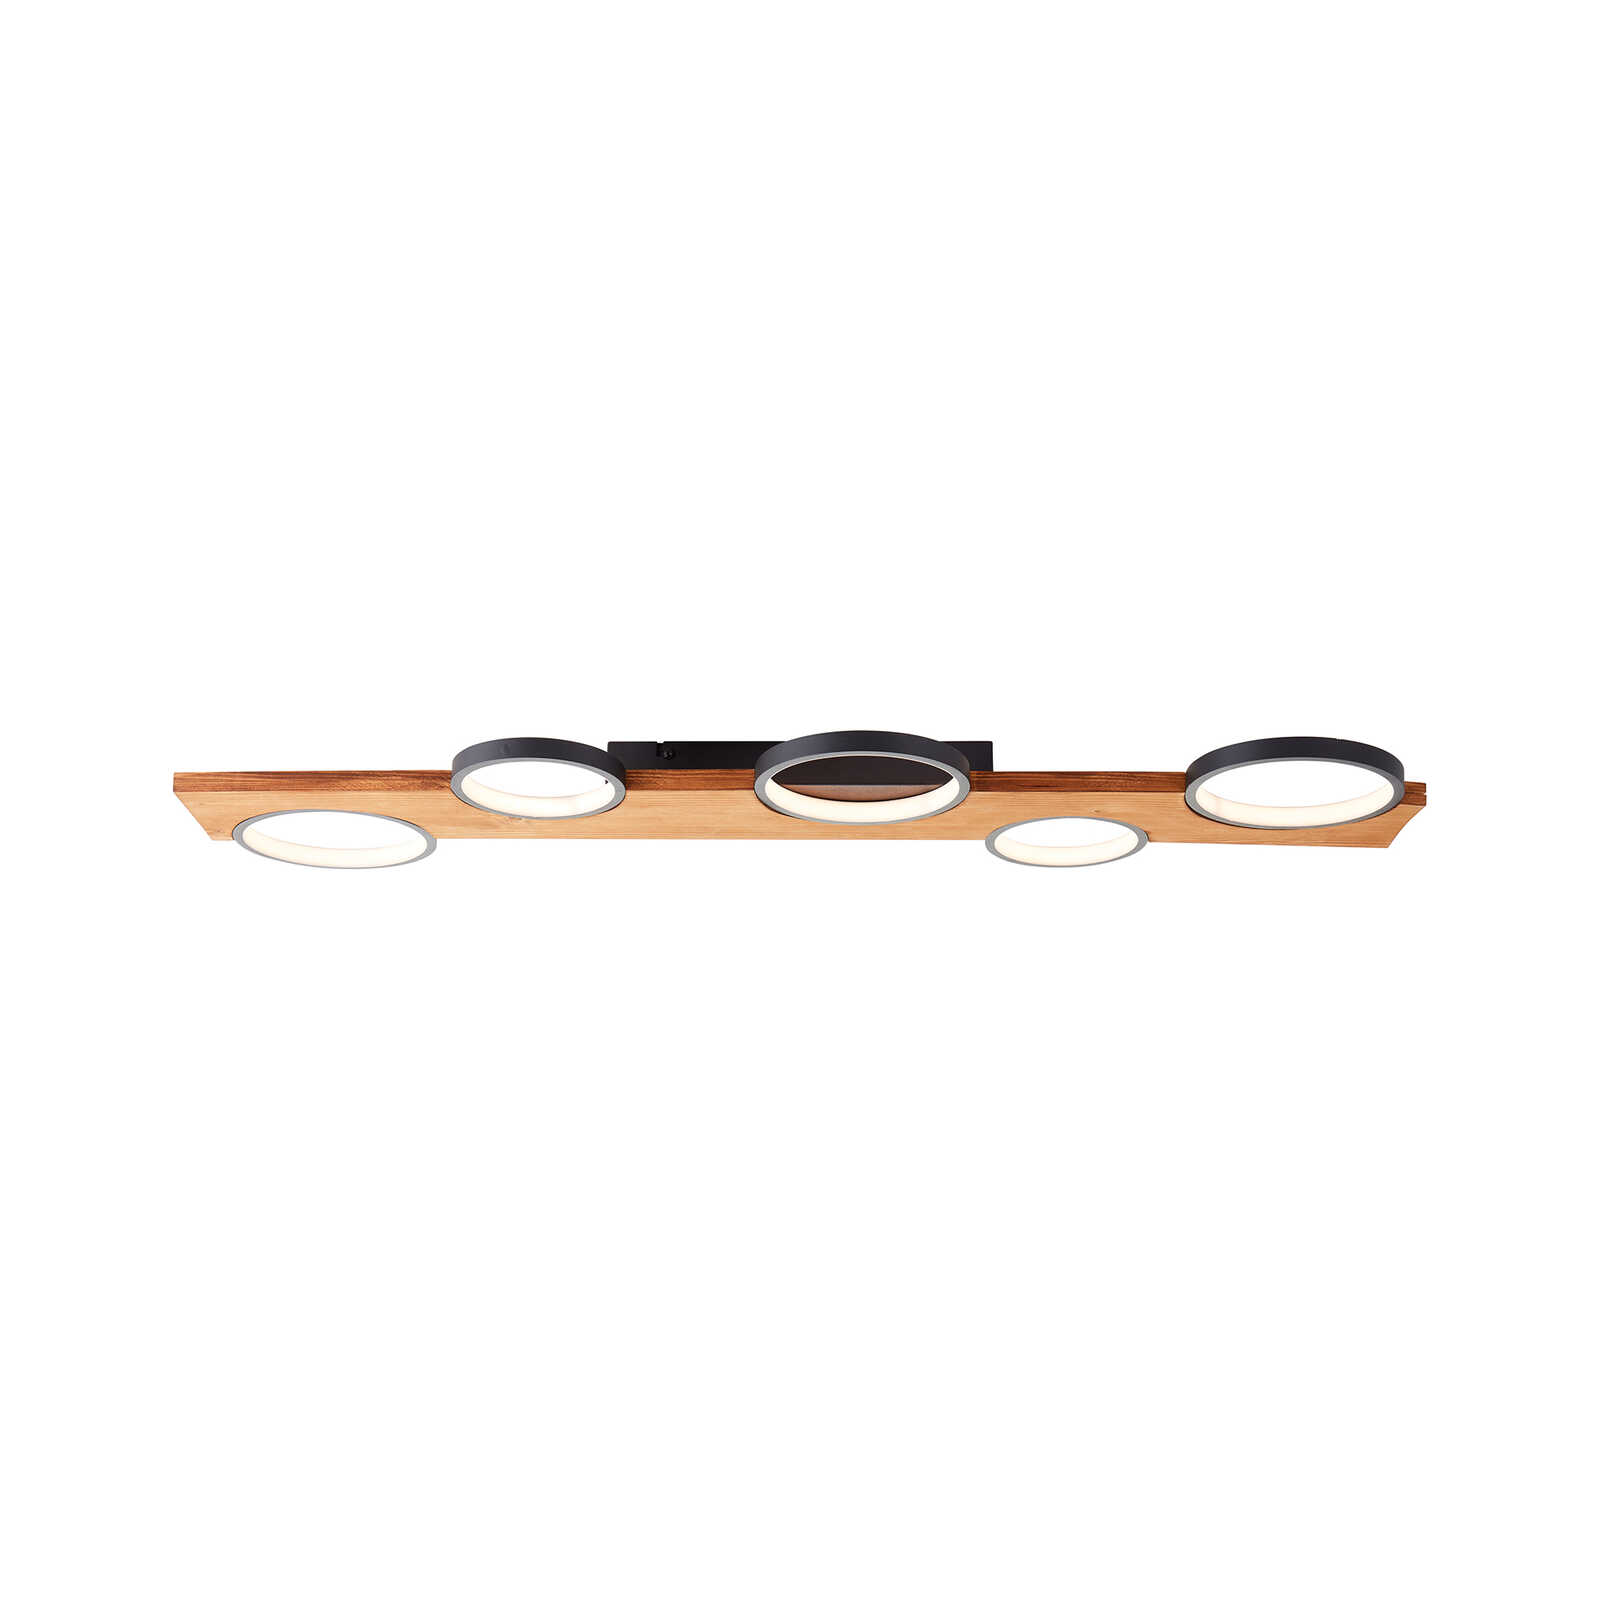 Wooden ceiling light - Lore - Brown
